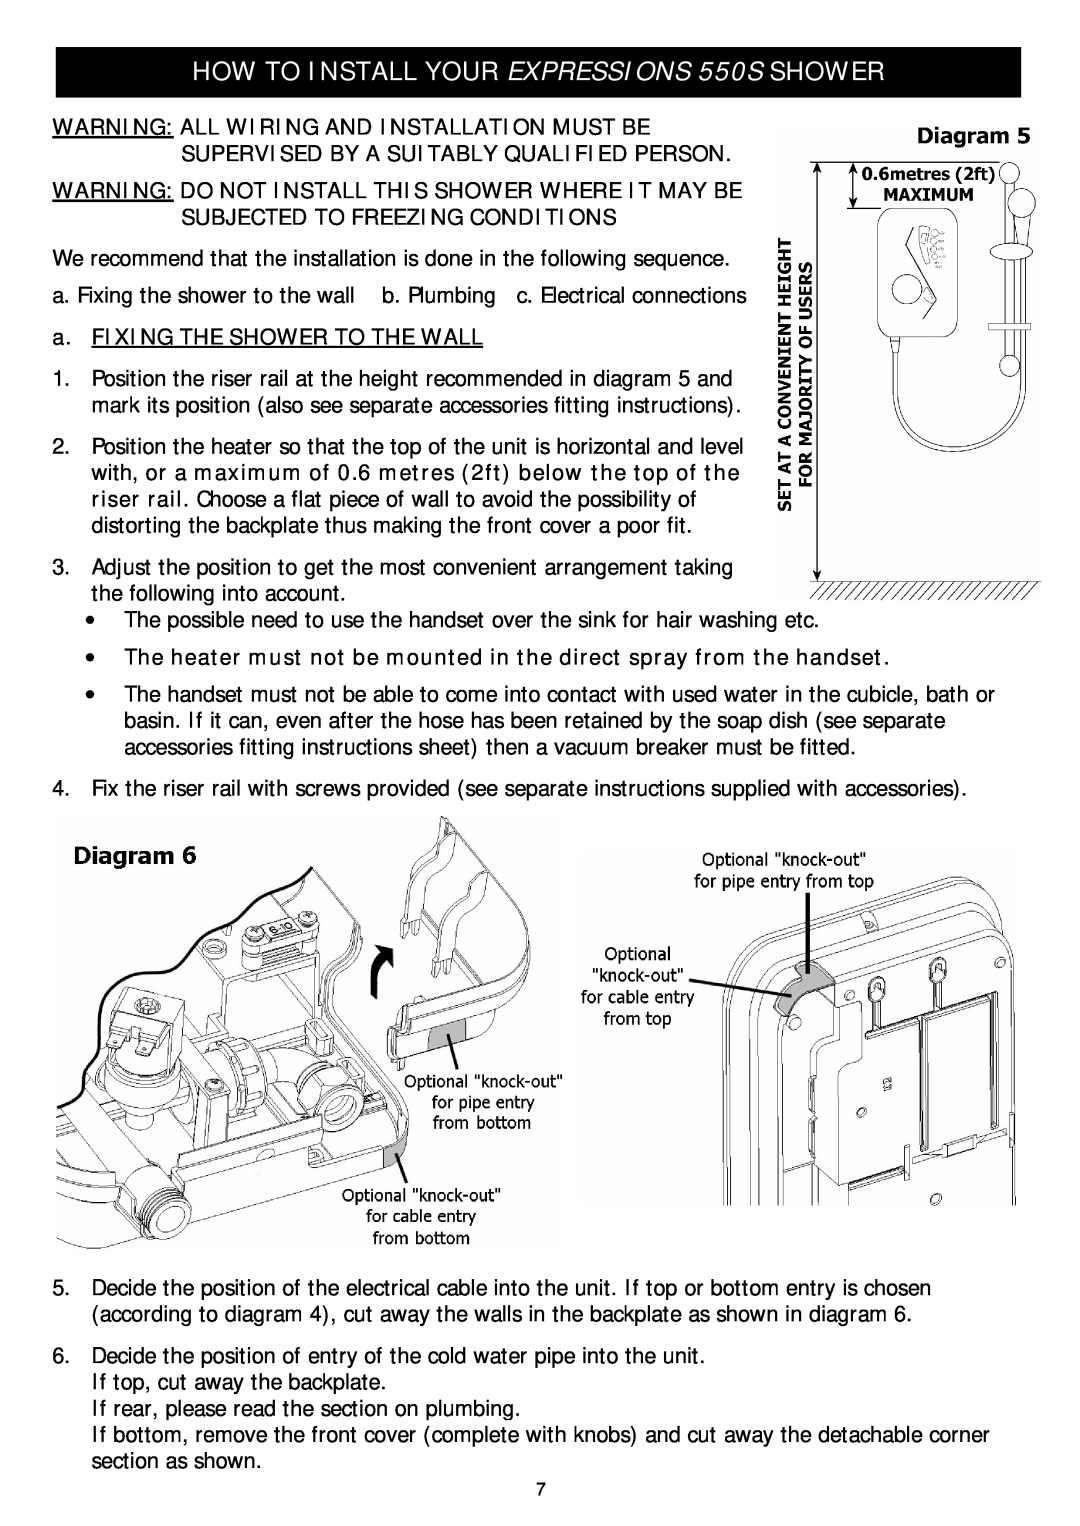 Redring manual HOW TO INSTALL YOUR EXPRESSIONS 550S SHOWER, Warning All Wiring And Installation Must Be 